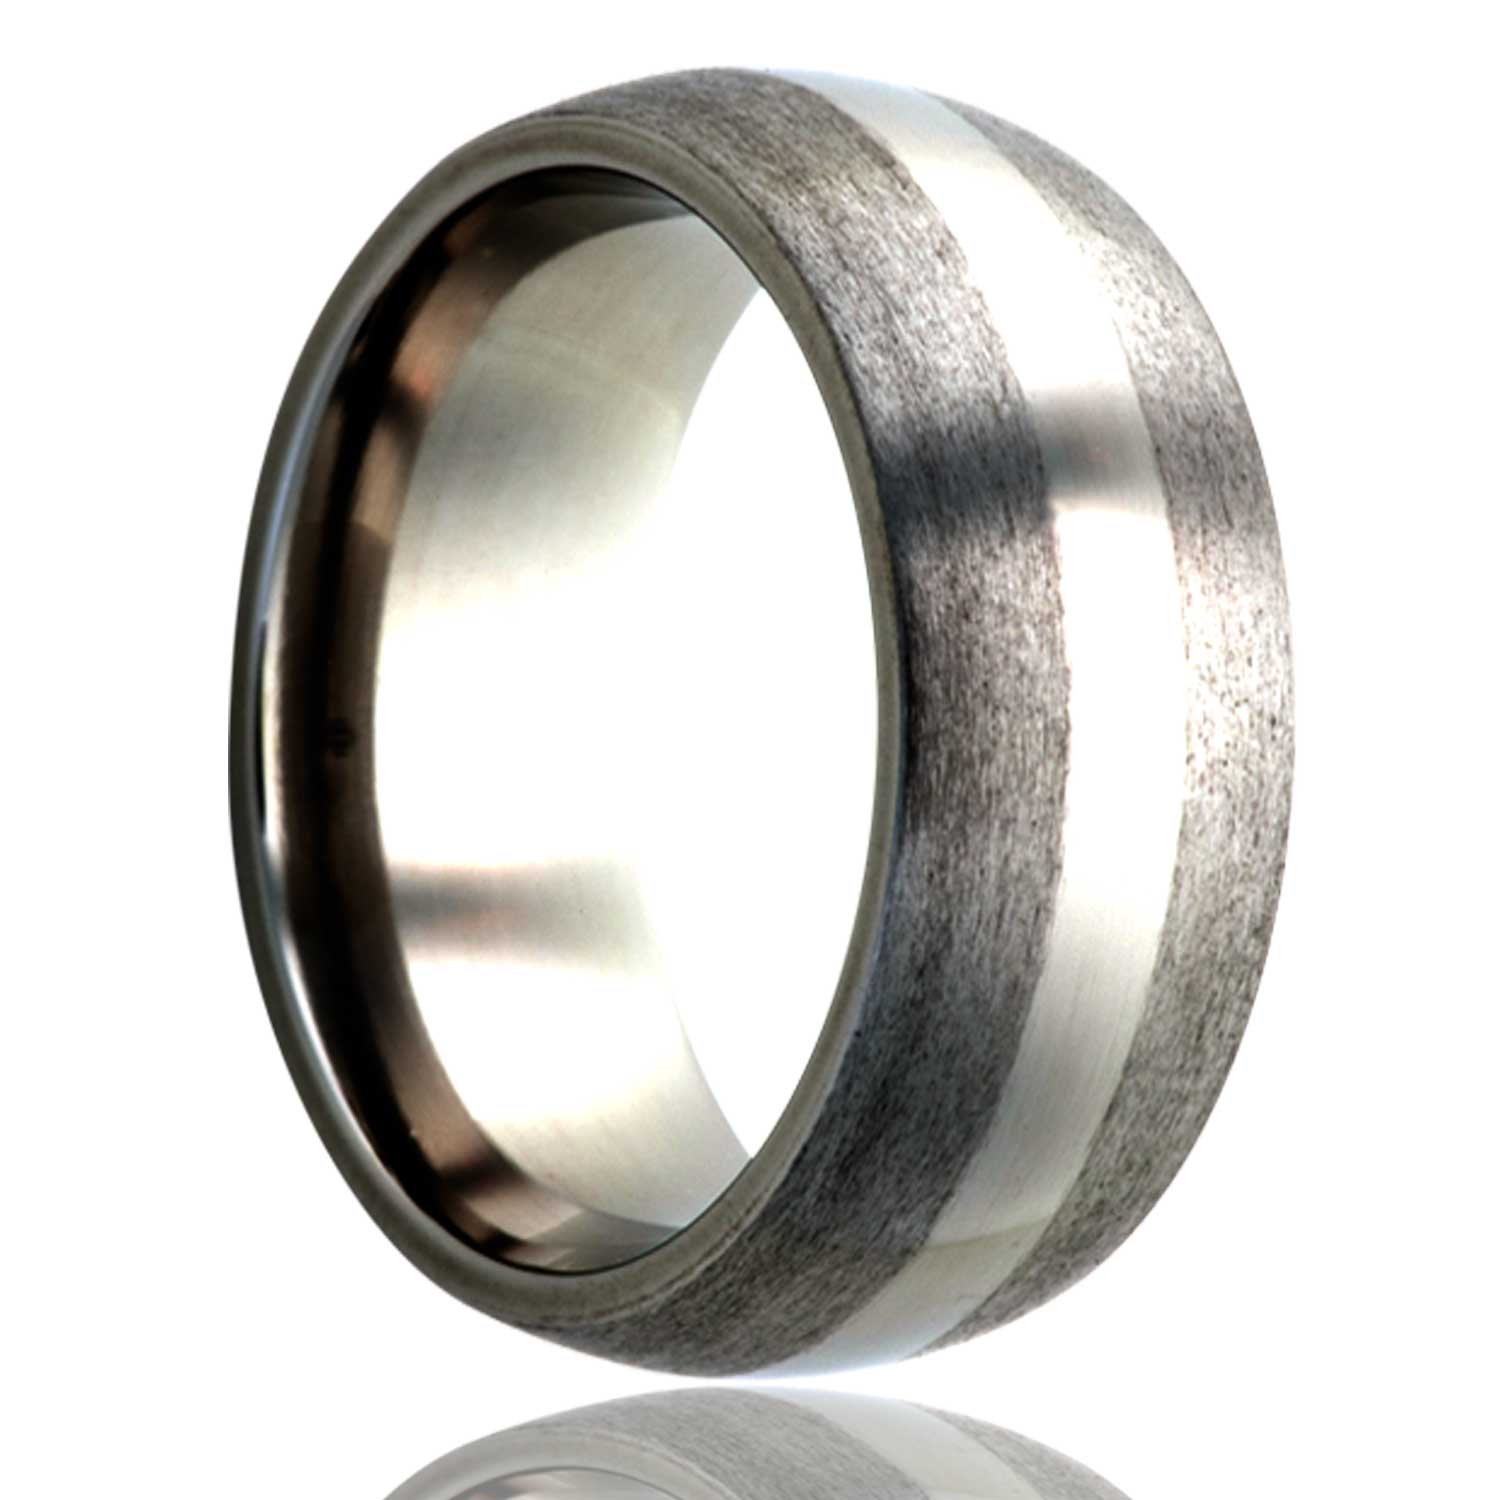 A domed satin finish titanium wedding band with polished stripe displayed on a neutral white background.